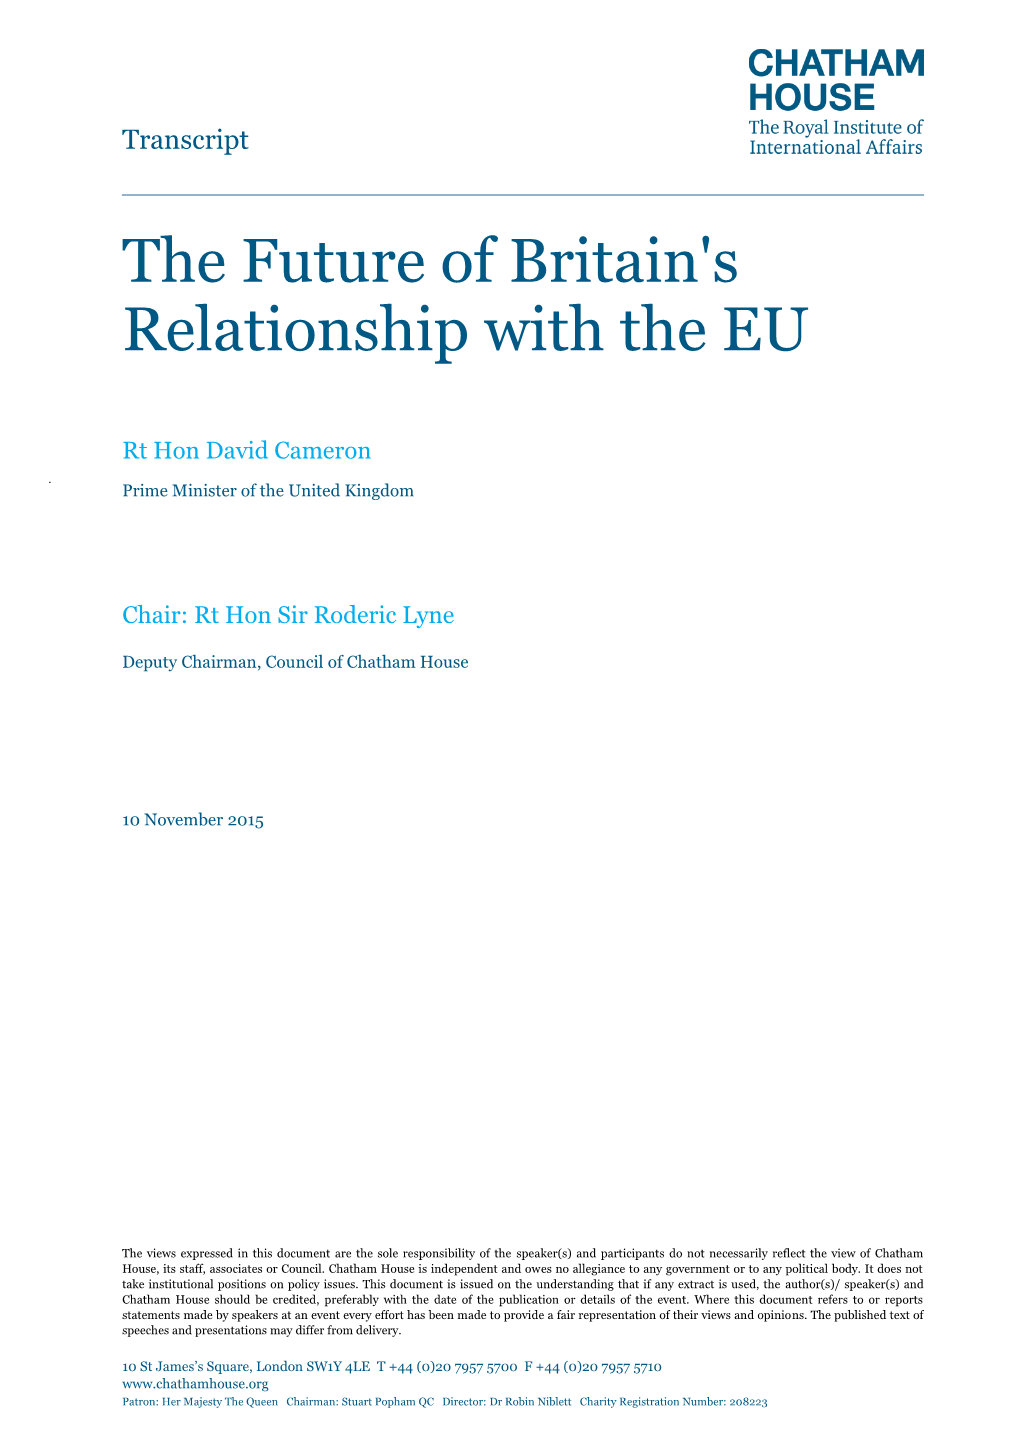 The Future of Britain's Relationship with the EU